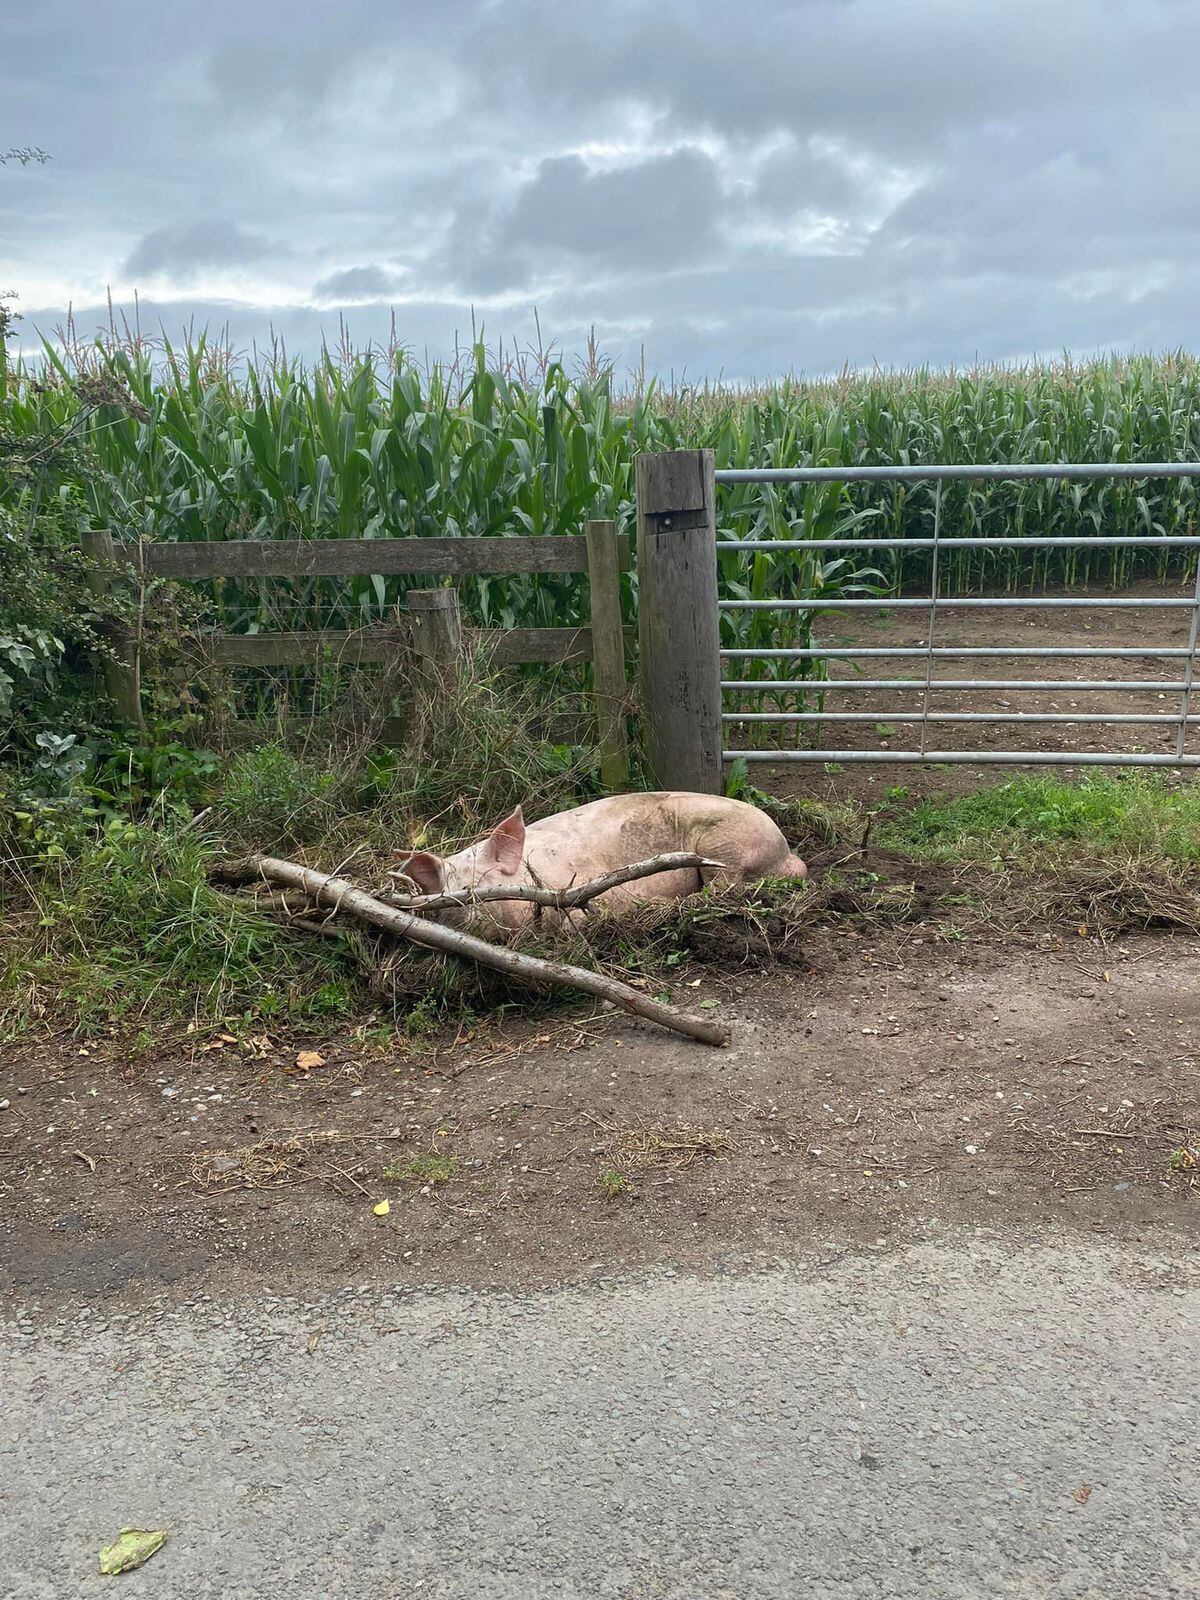 One of the pigs lying as it was found